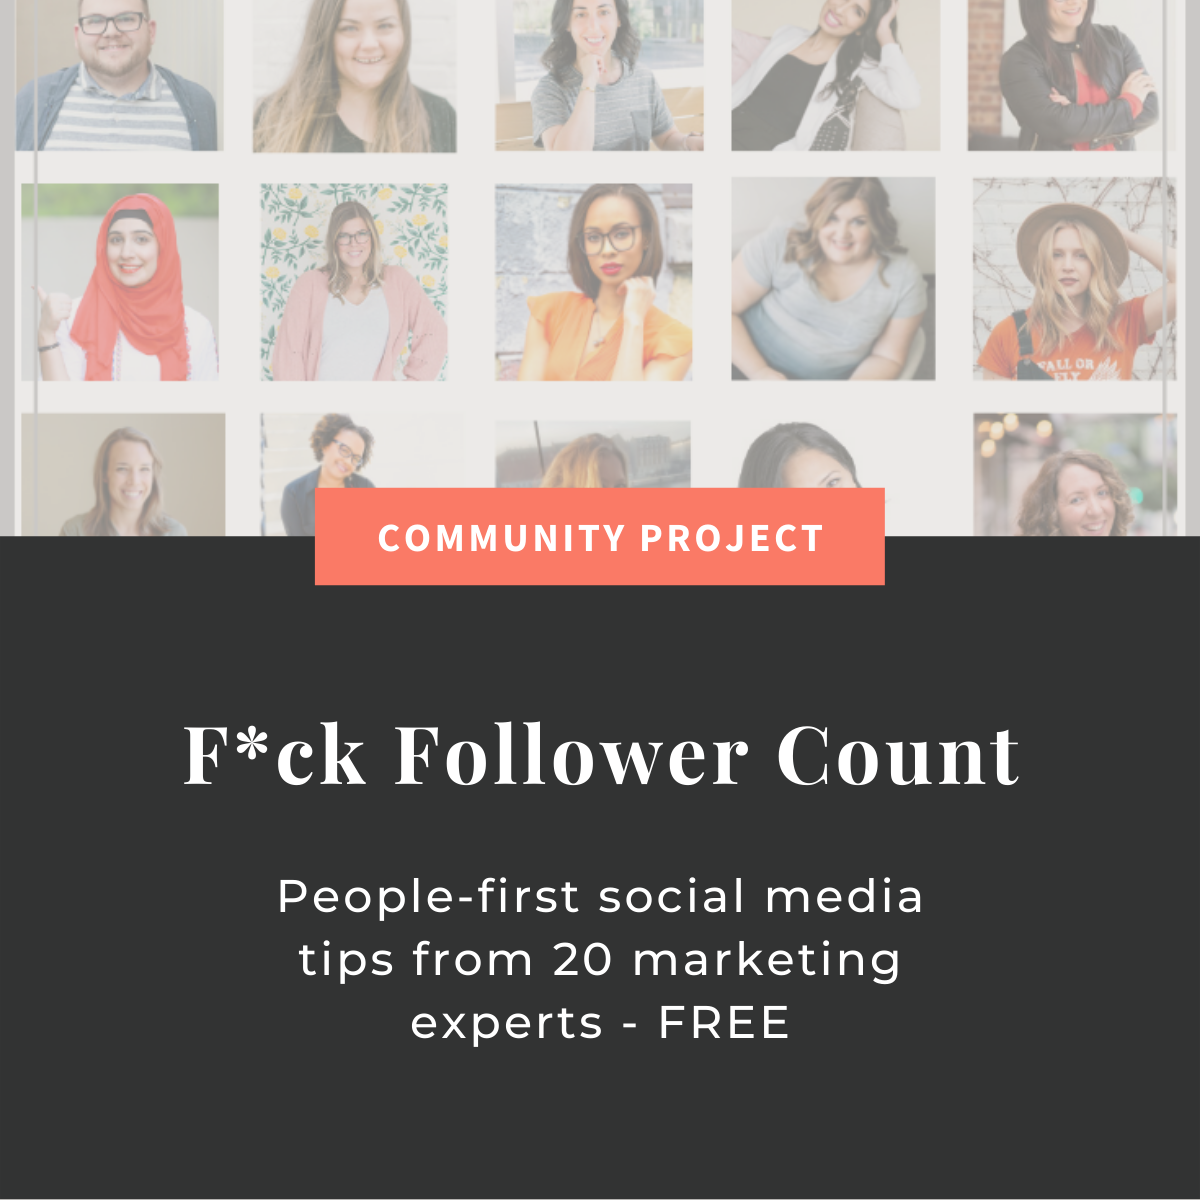 F*ck Follower Count: FREE Community Project